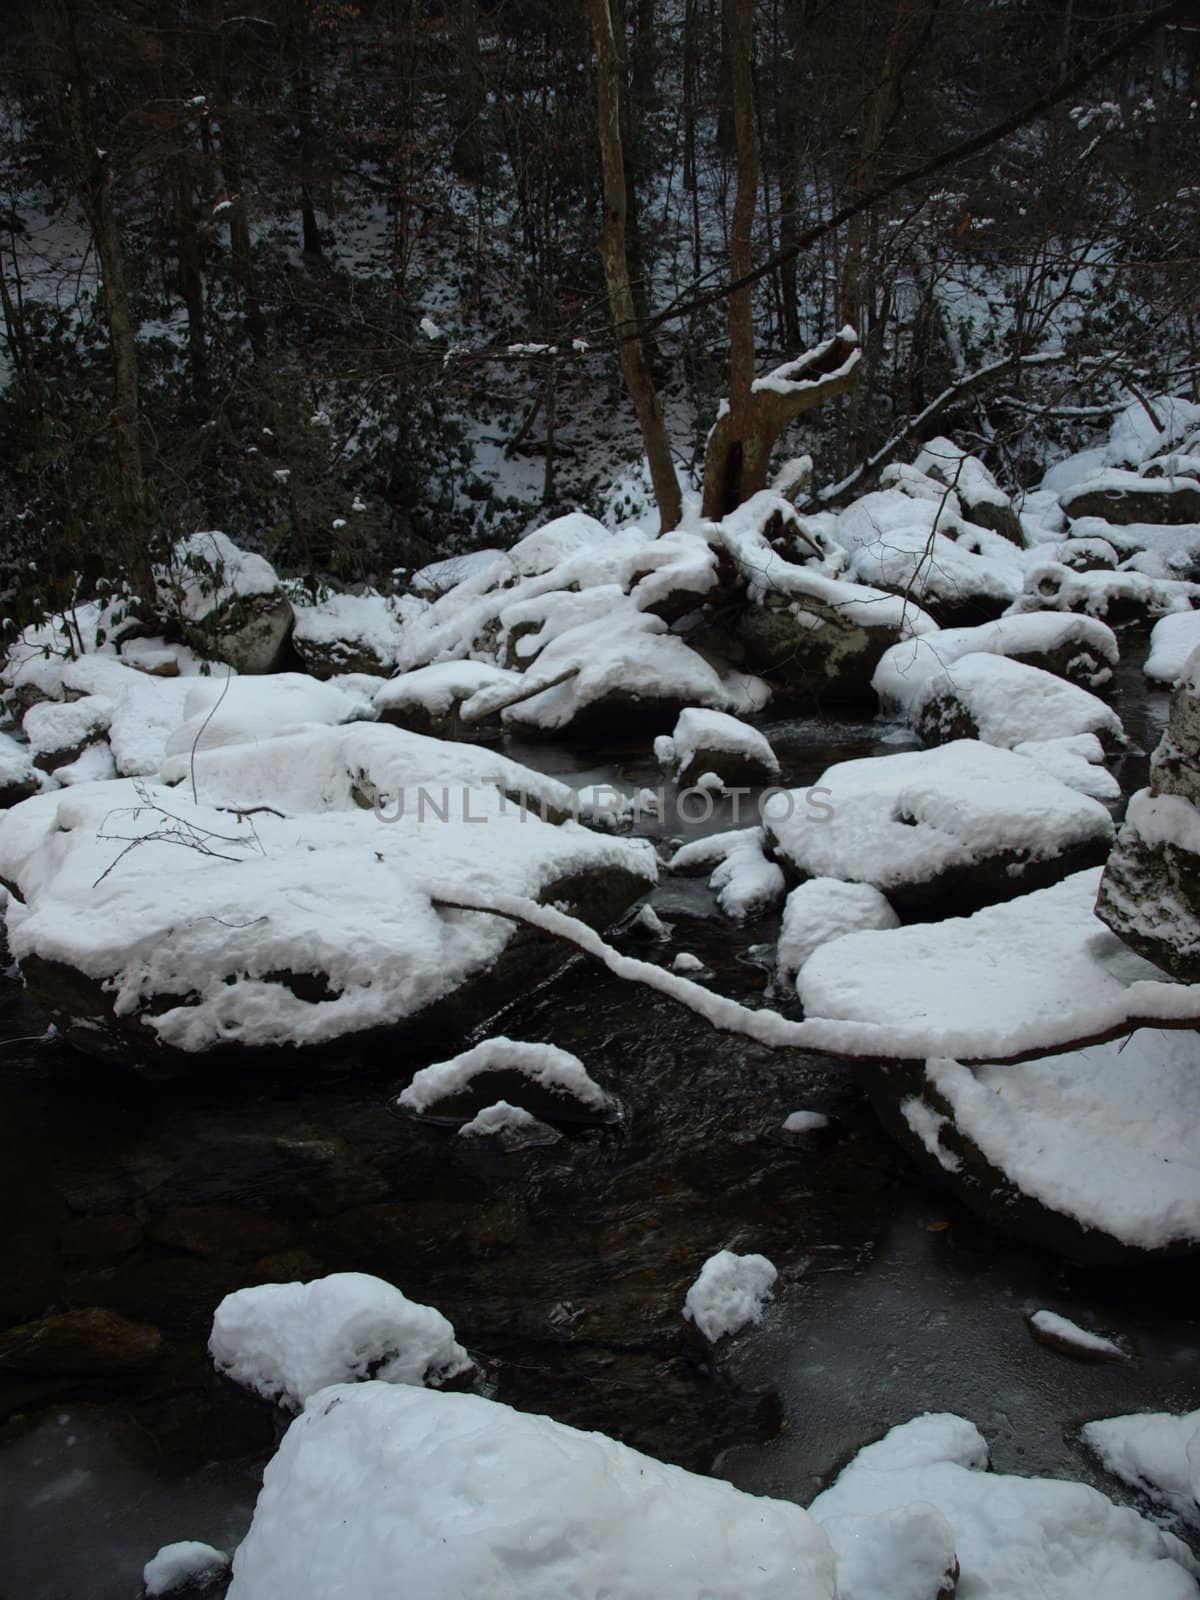 View along the Jacobs Fork River at South Mountain State Park after a snow fall